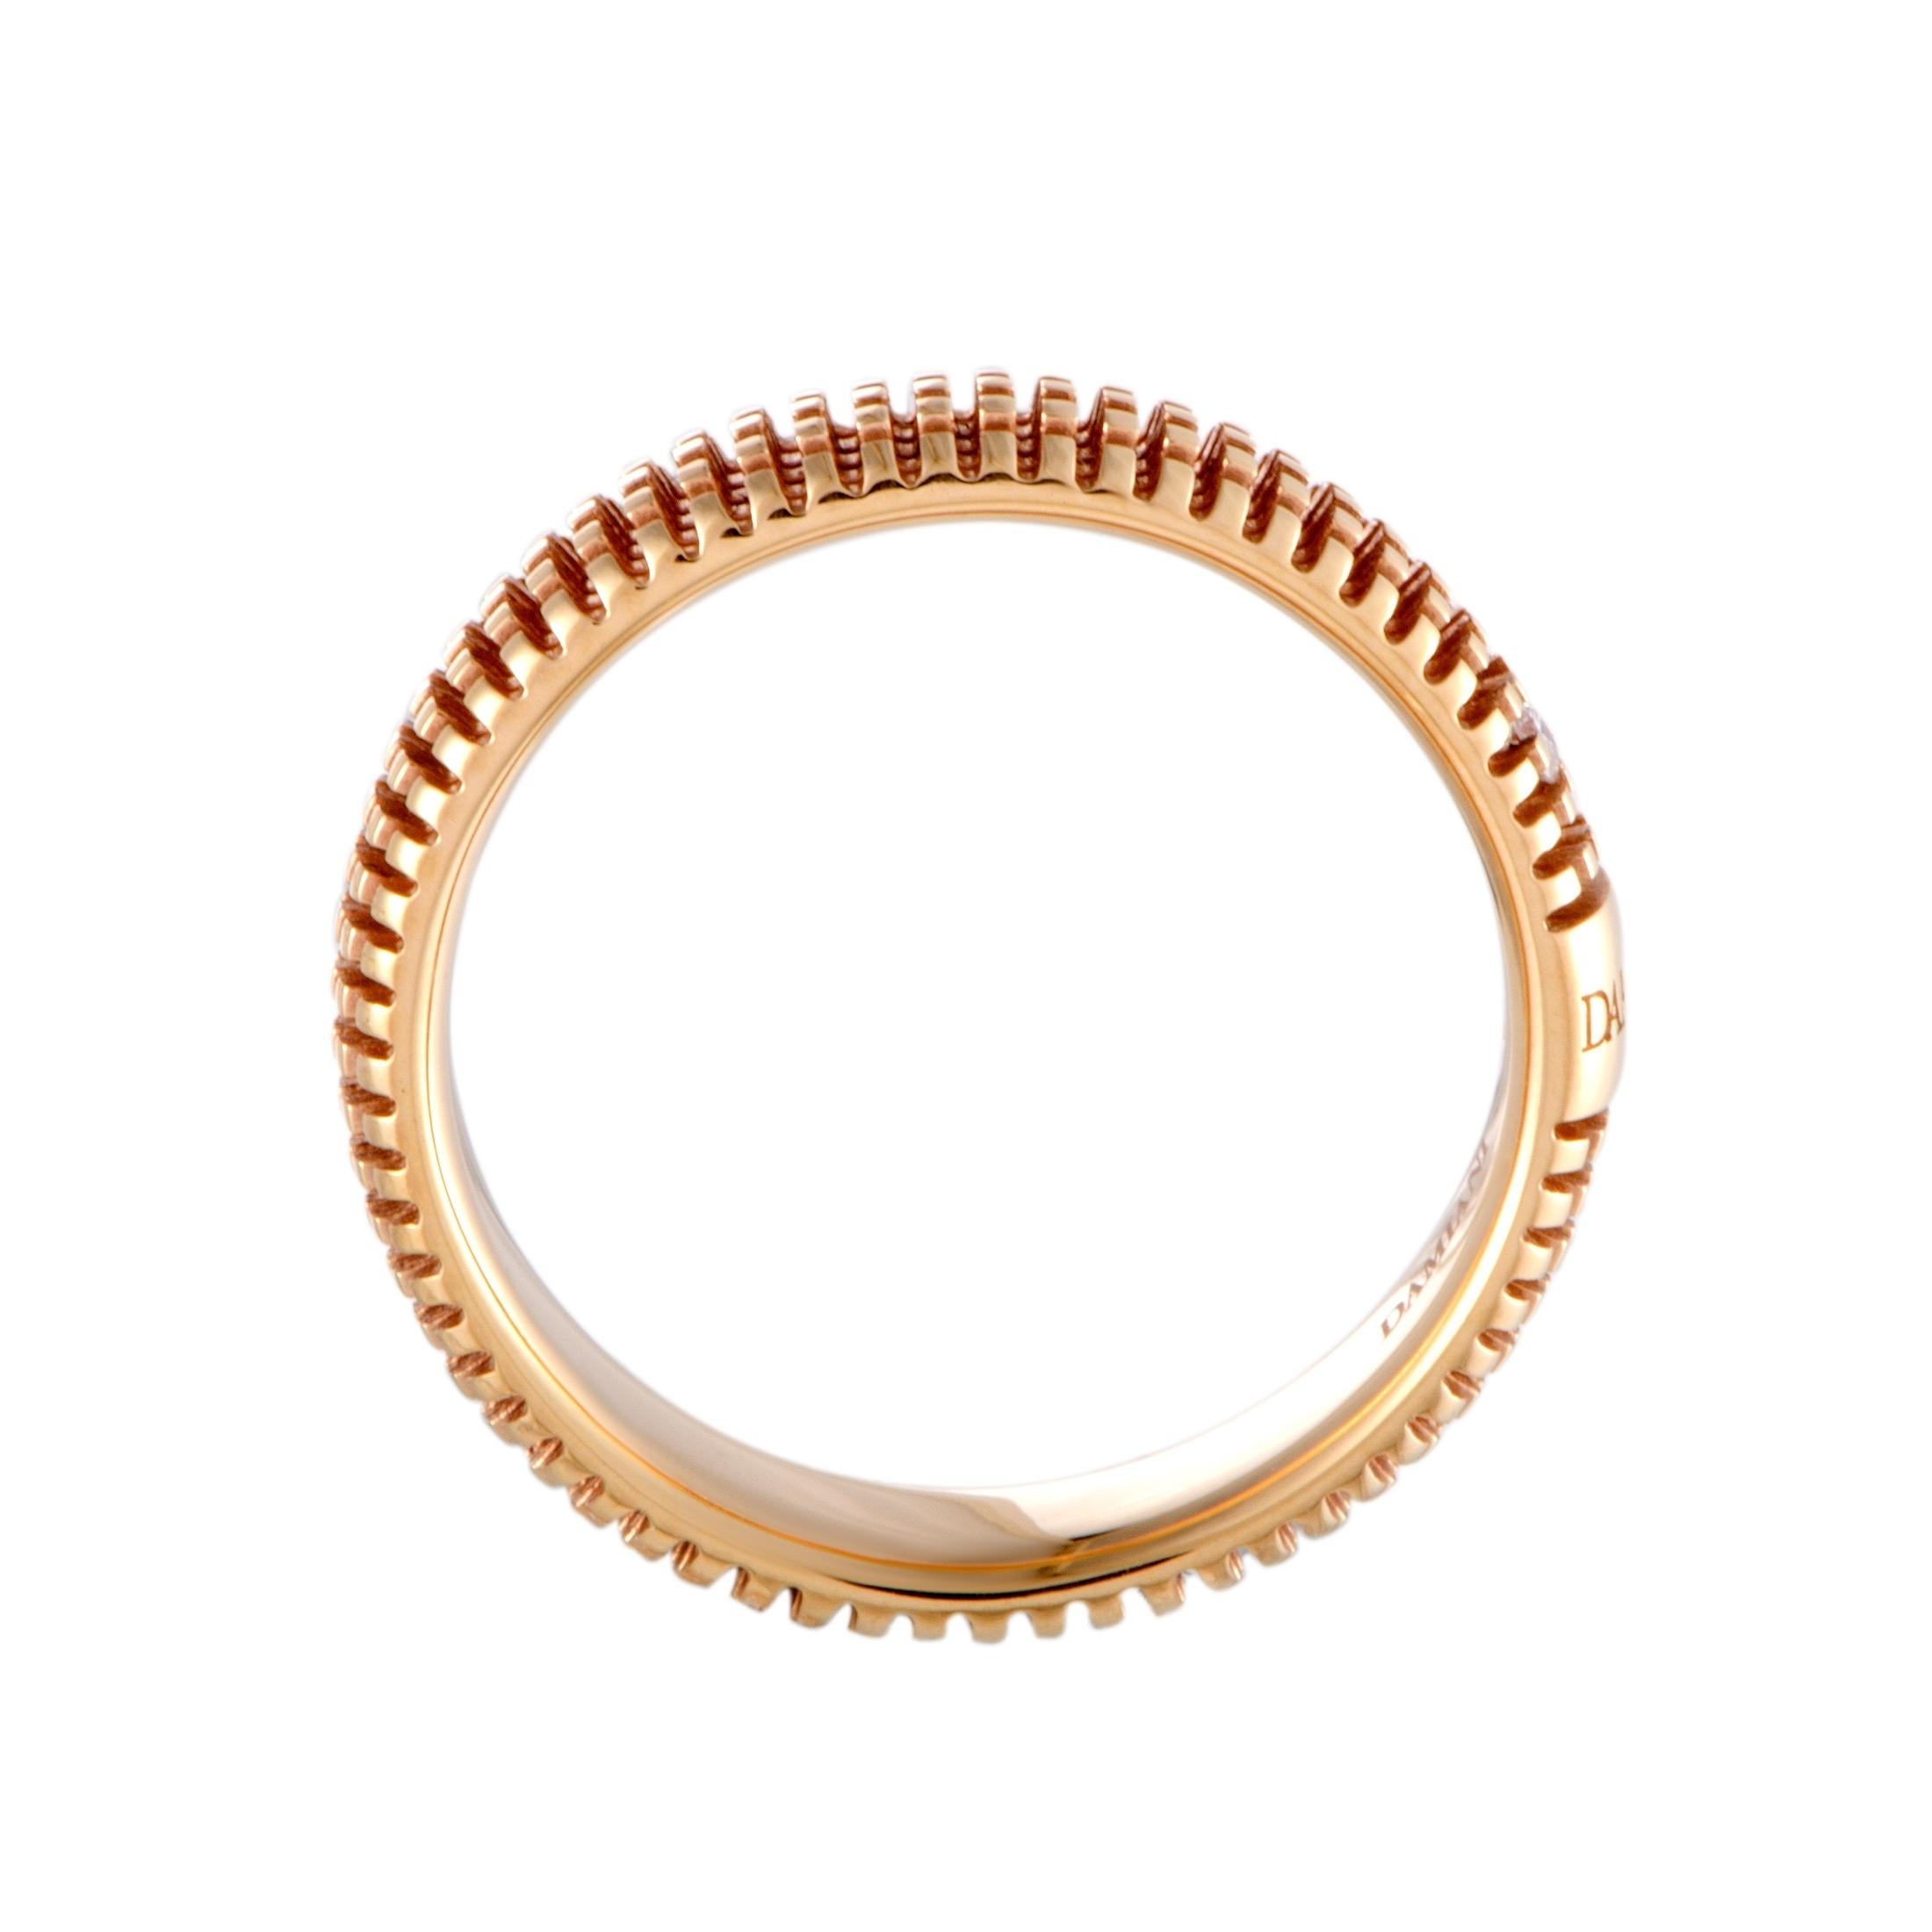 The exquisitely cut diamond stone is wonderfully set against the alluringly radiant rose gold in this exceptional jewelry piece that boasts a captivatingly prestigious appeal. The ring is splendidly designed by Damiani and it is beautifully crafted